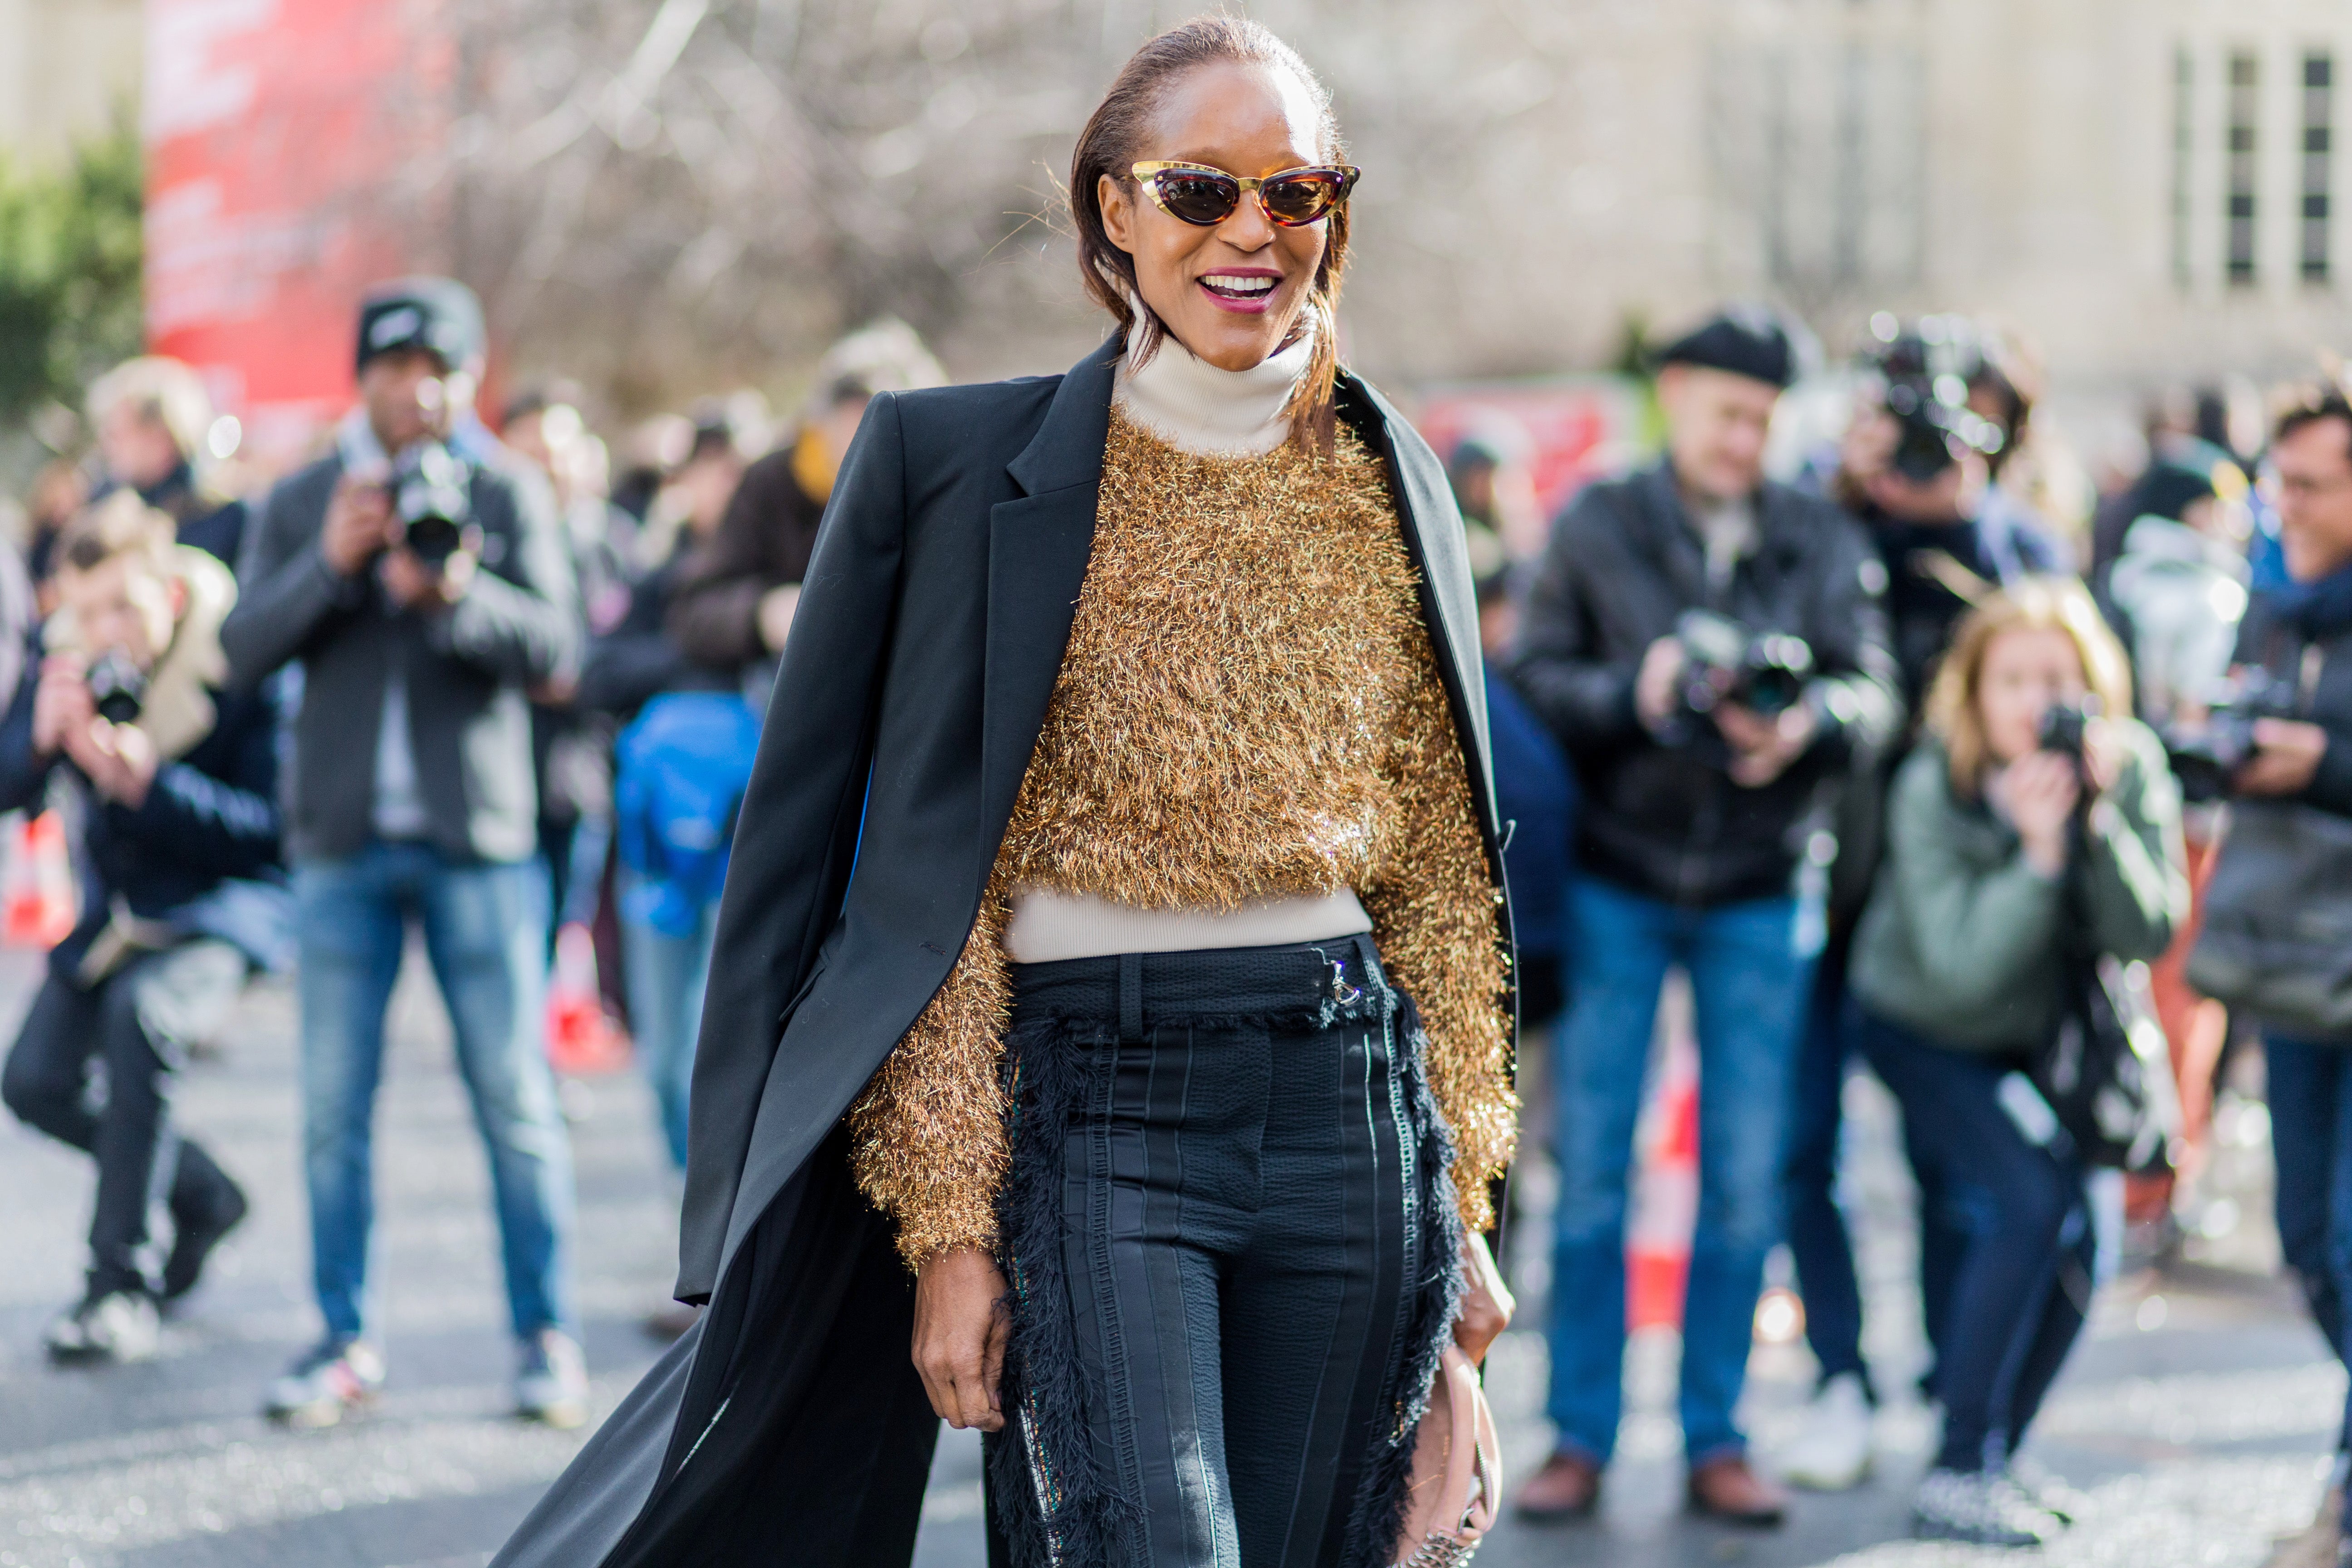 Street Style: 47 Photos of Stunning Black Women Who Turned Heads